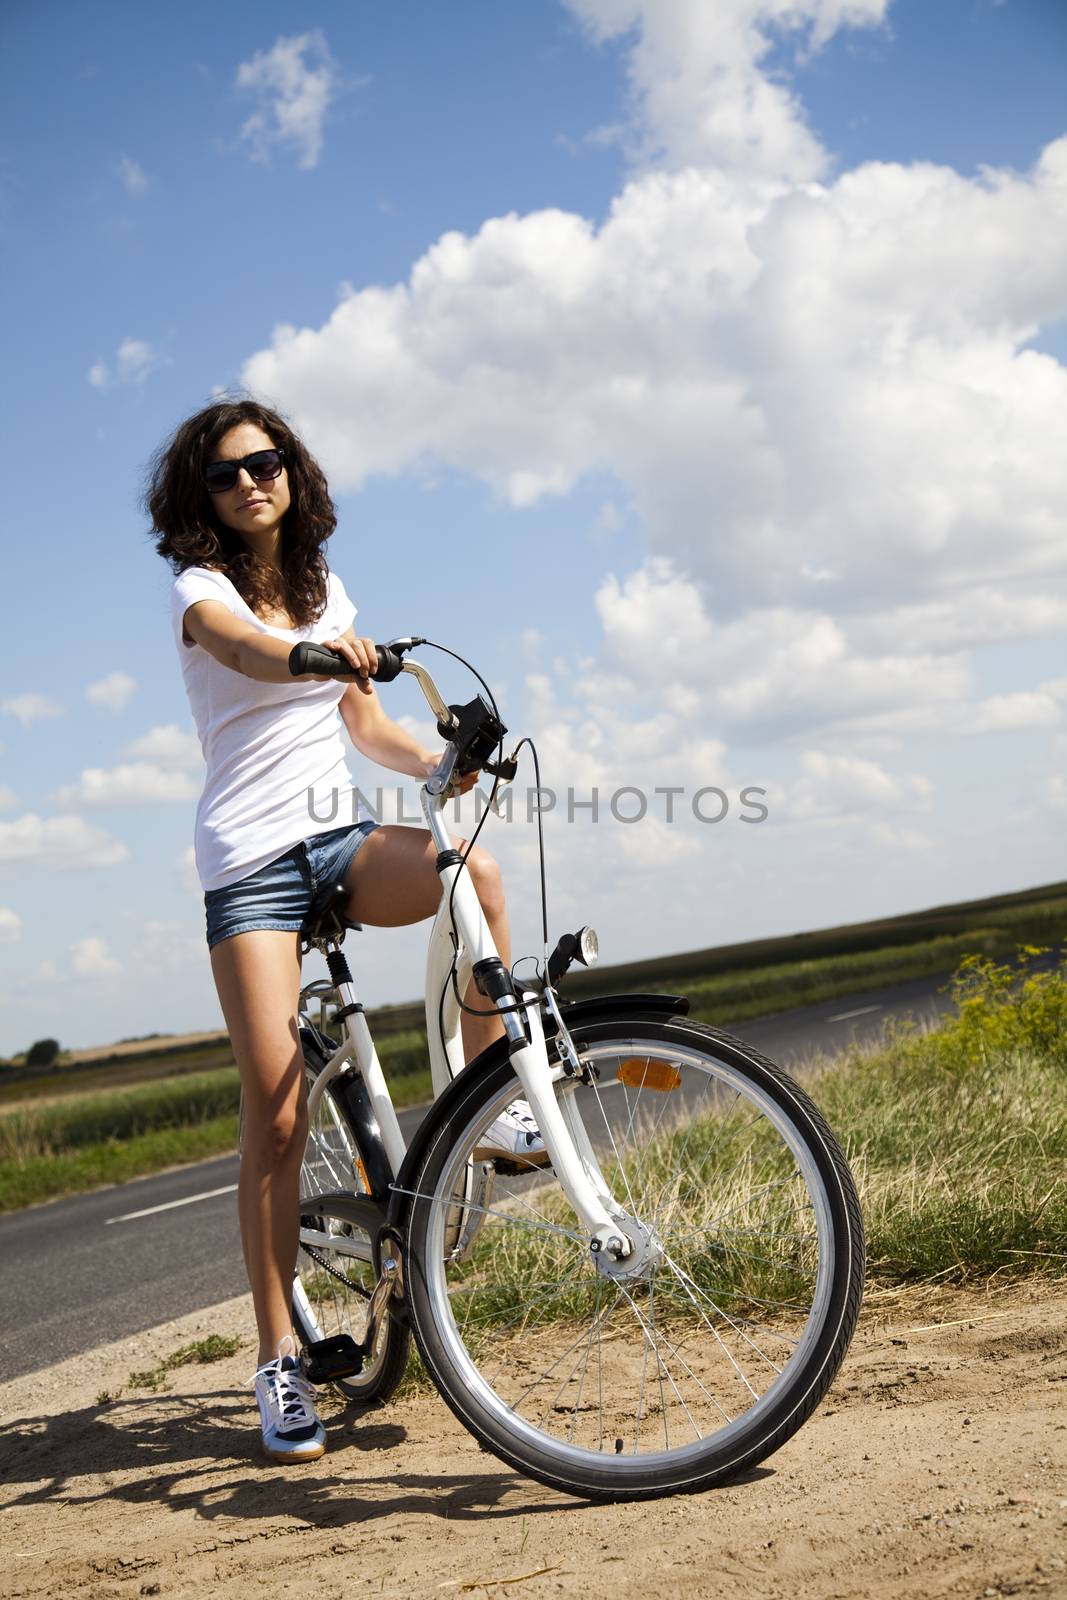 Woman riding bicycle, summer free time spending